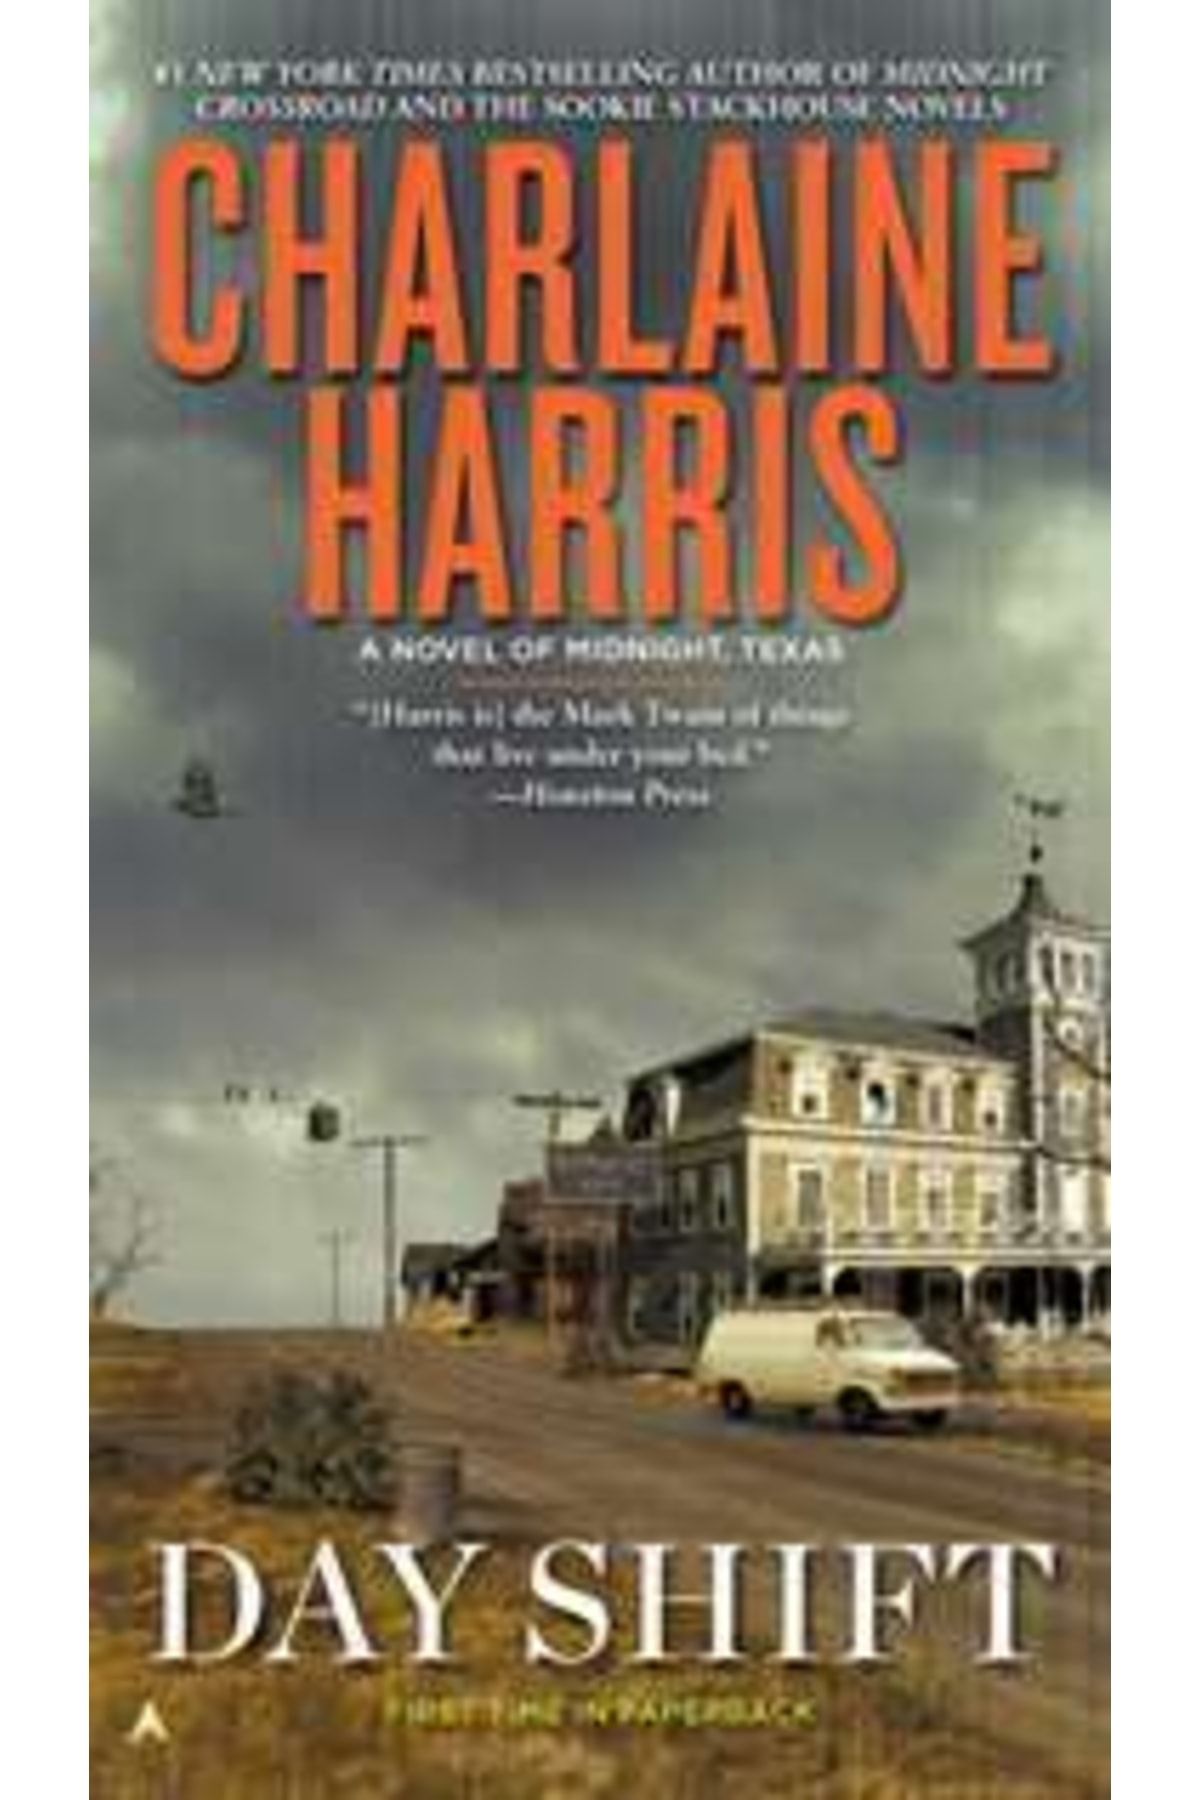 ACE Day Shift Charlaine Harris